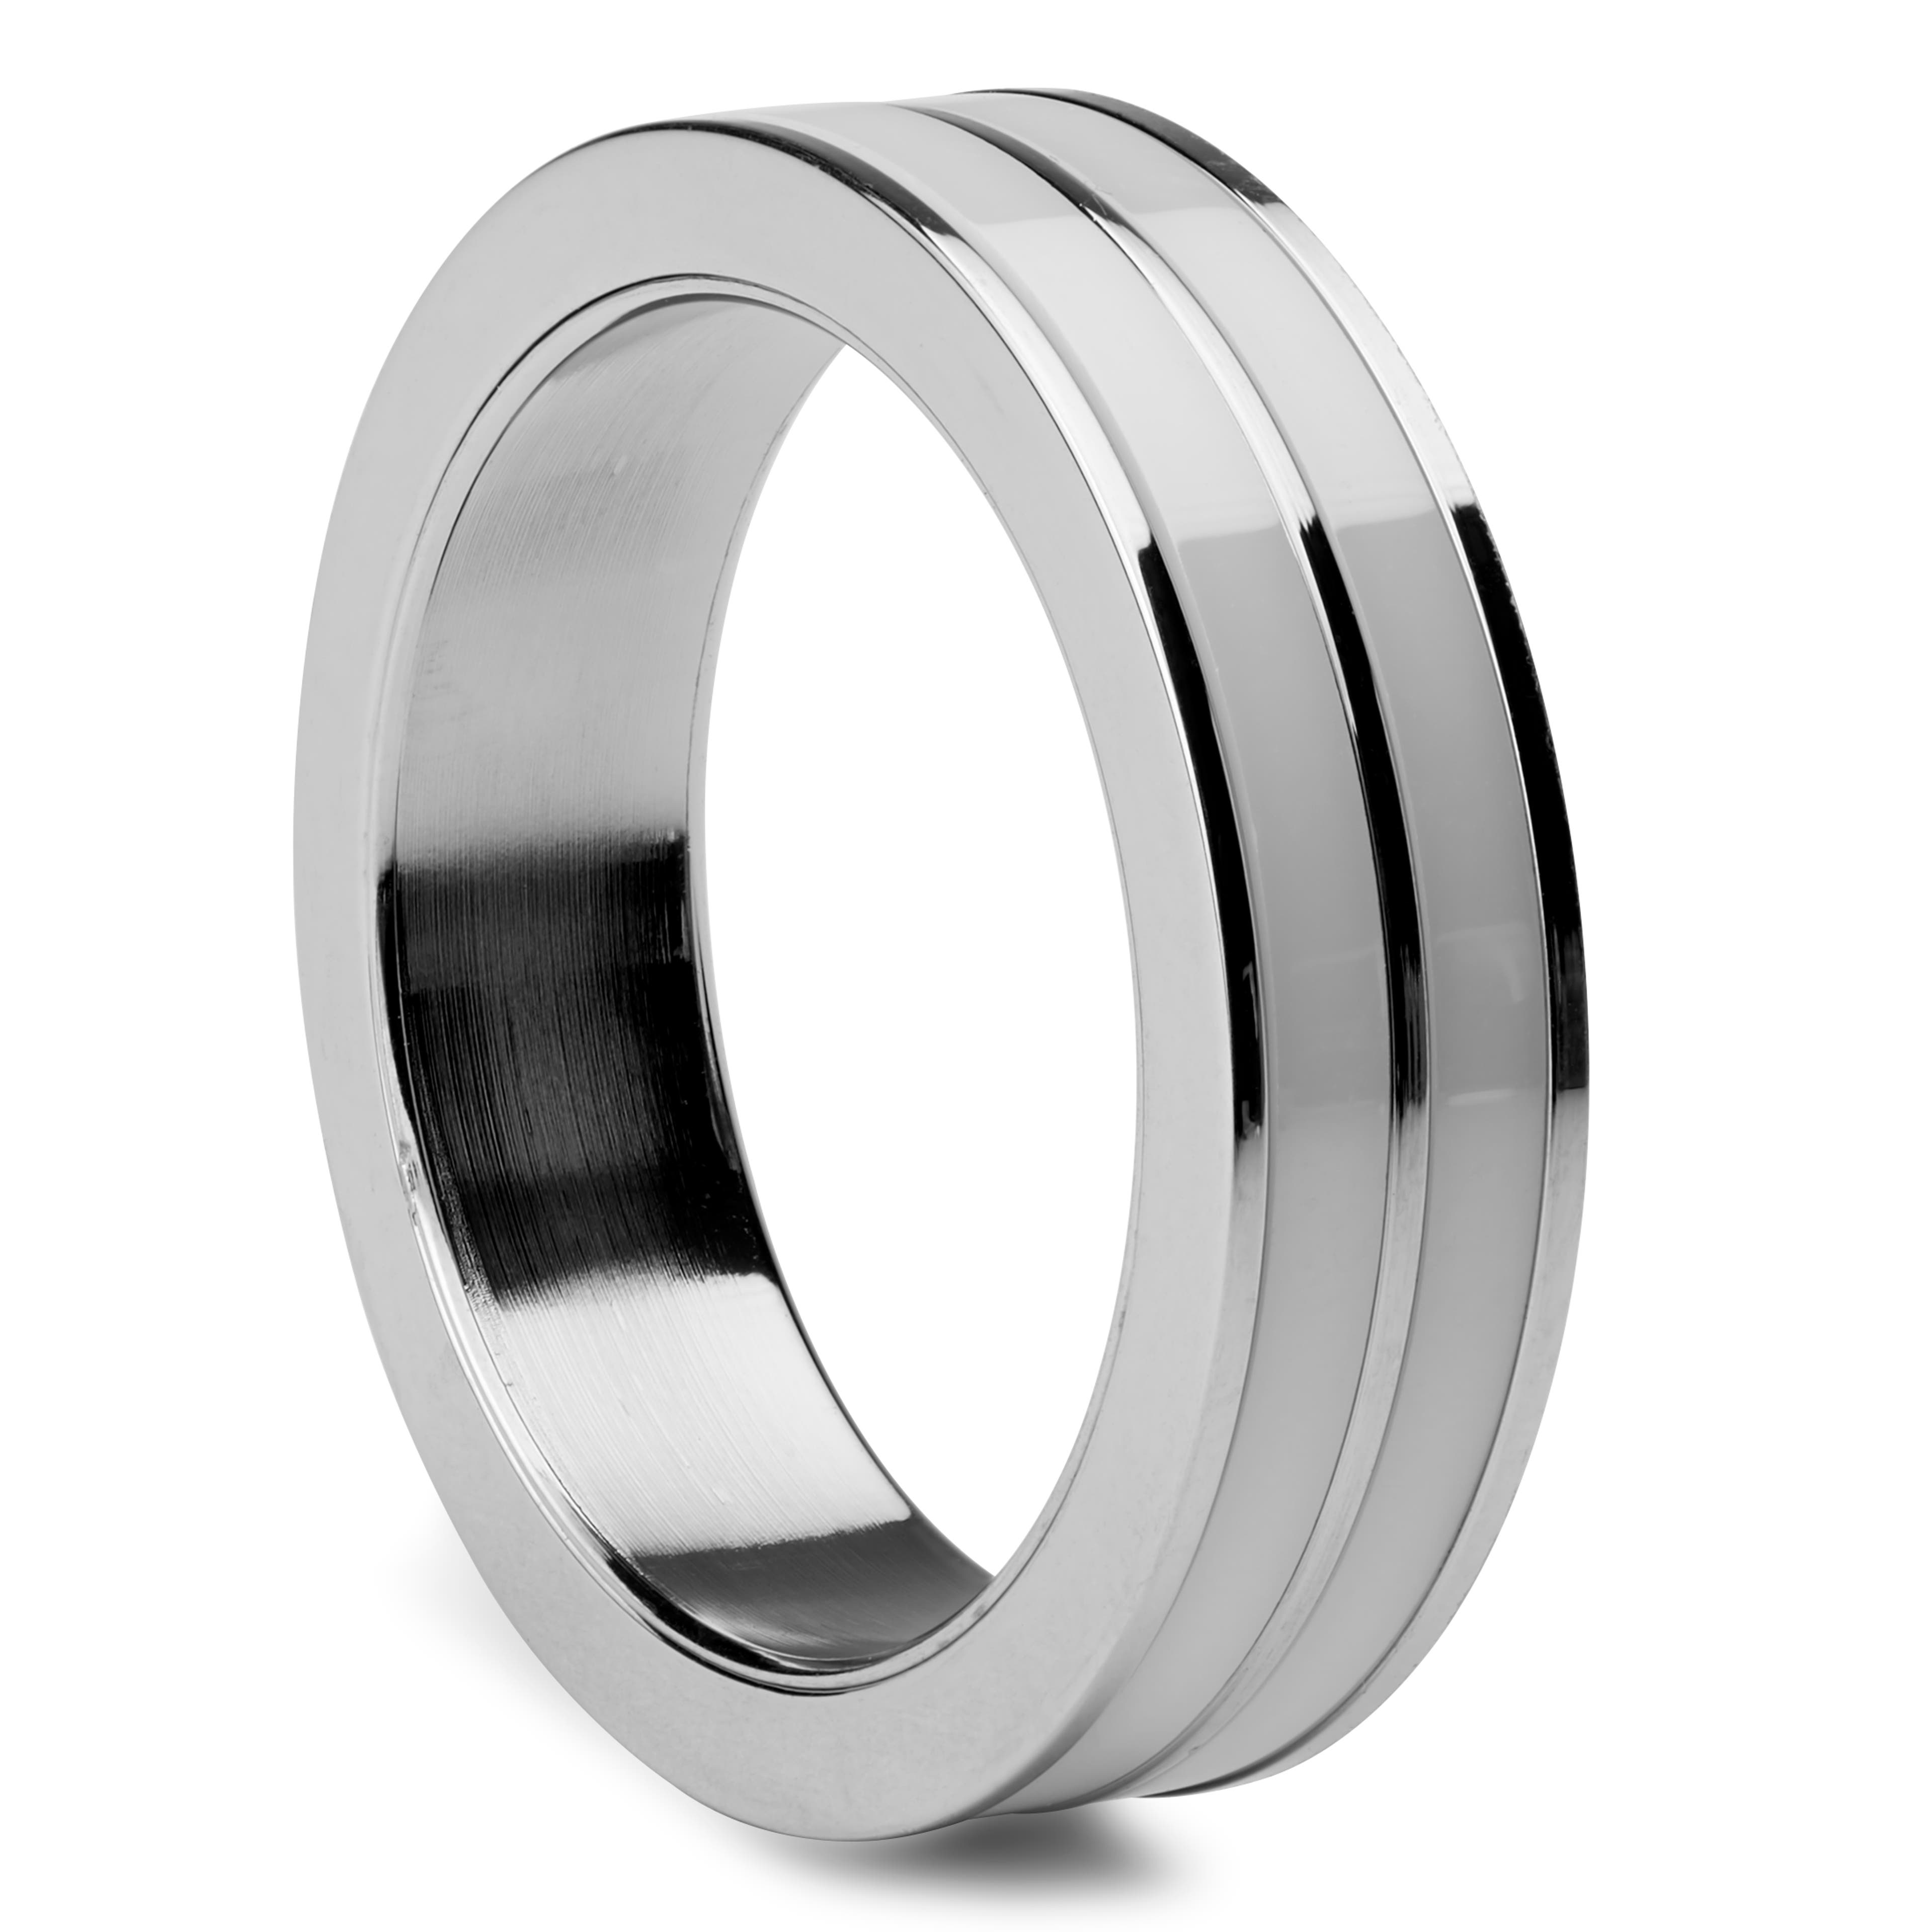 Silver-Tone Steel Ring with White Ceramic Inlay 